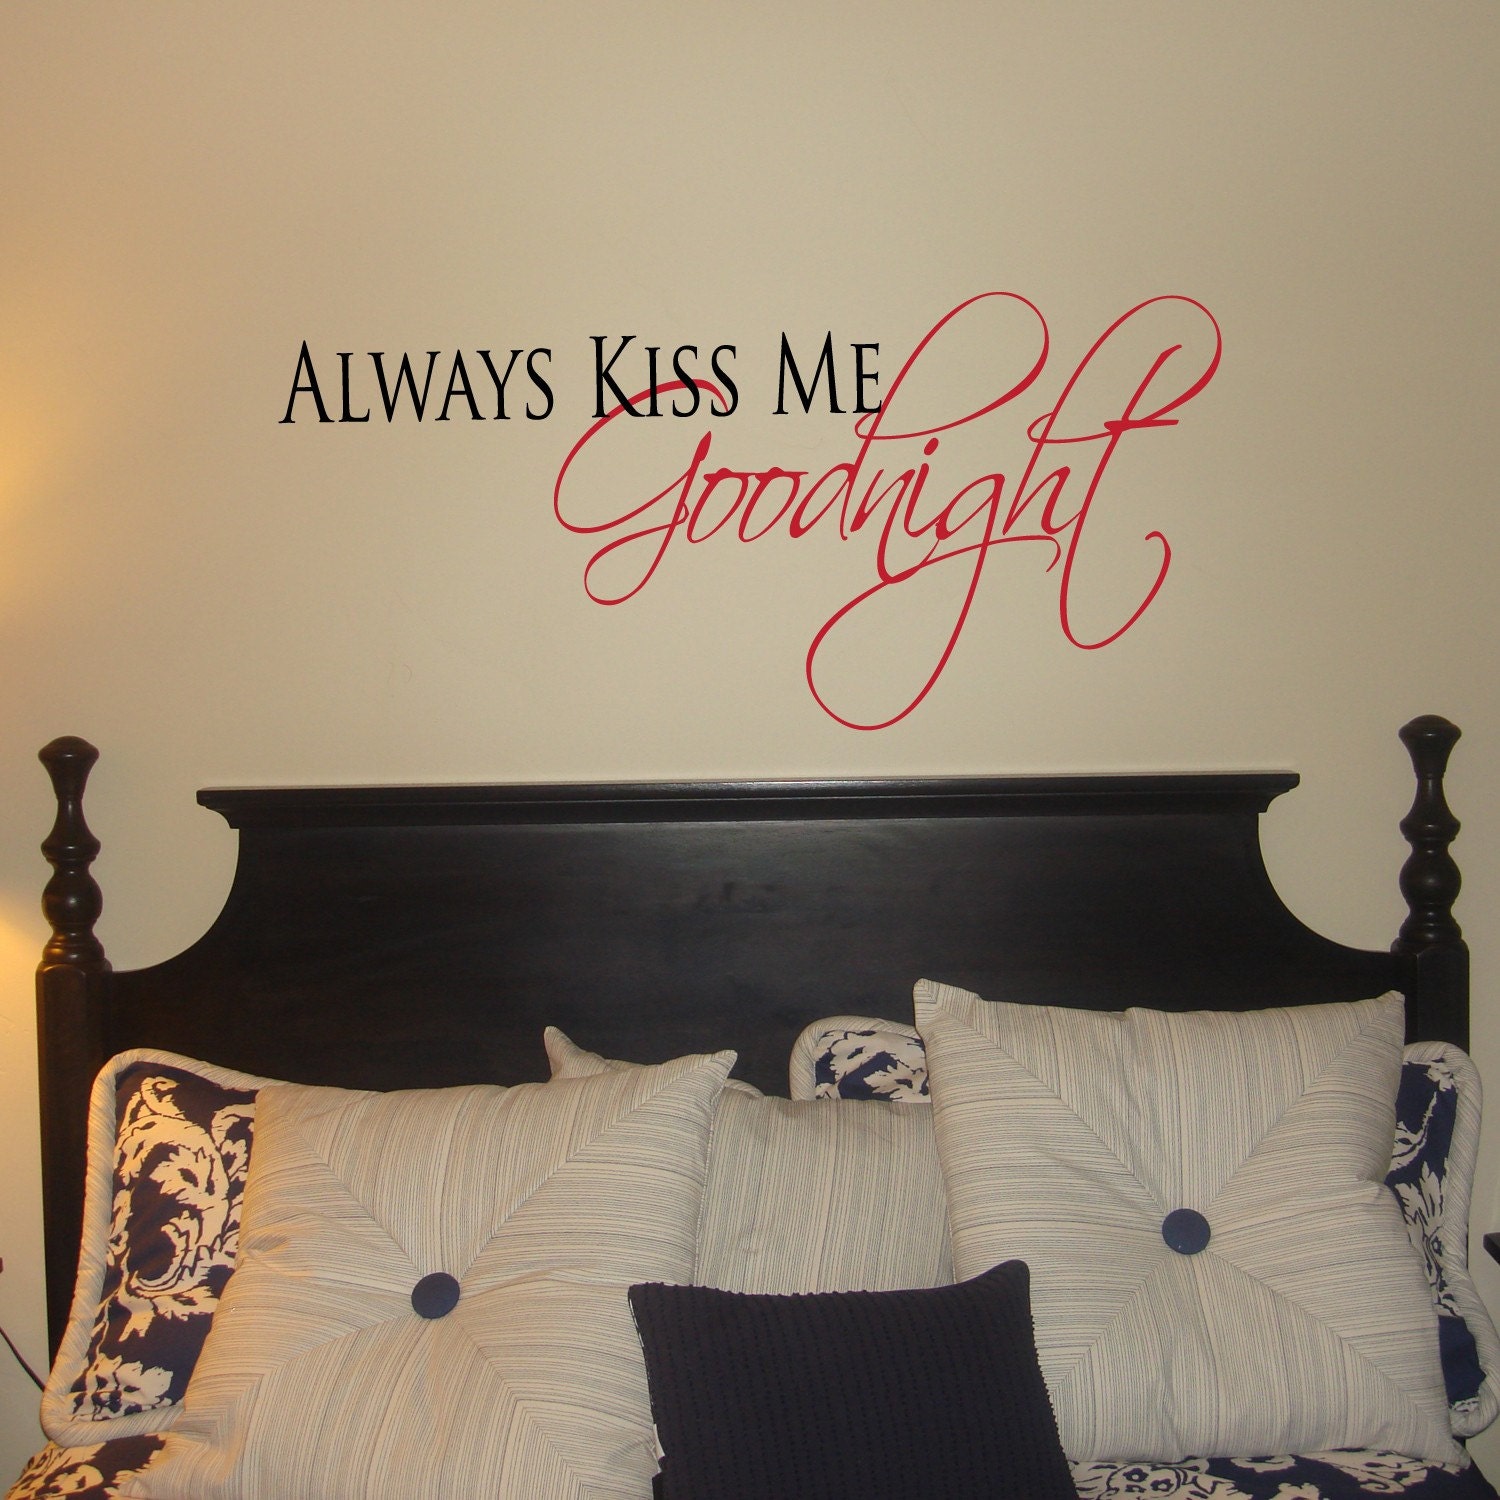 Alway kiss me goodnight- New-  - Vinyl Wall Lettering and Decor